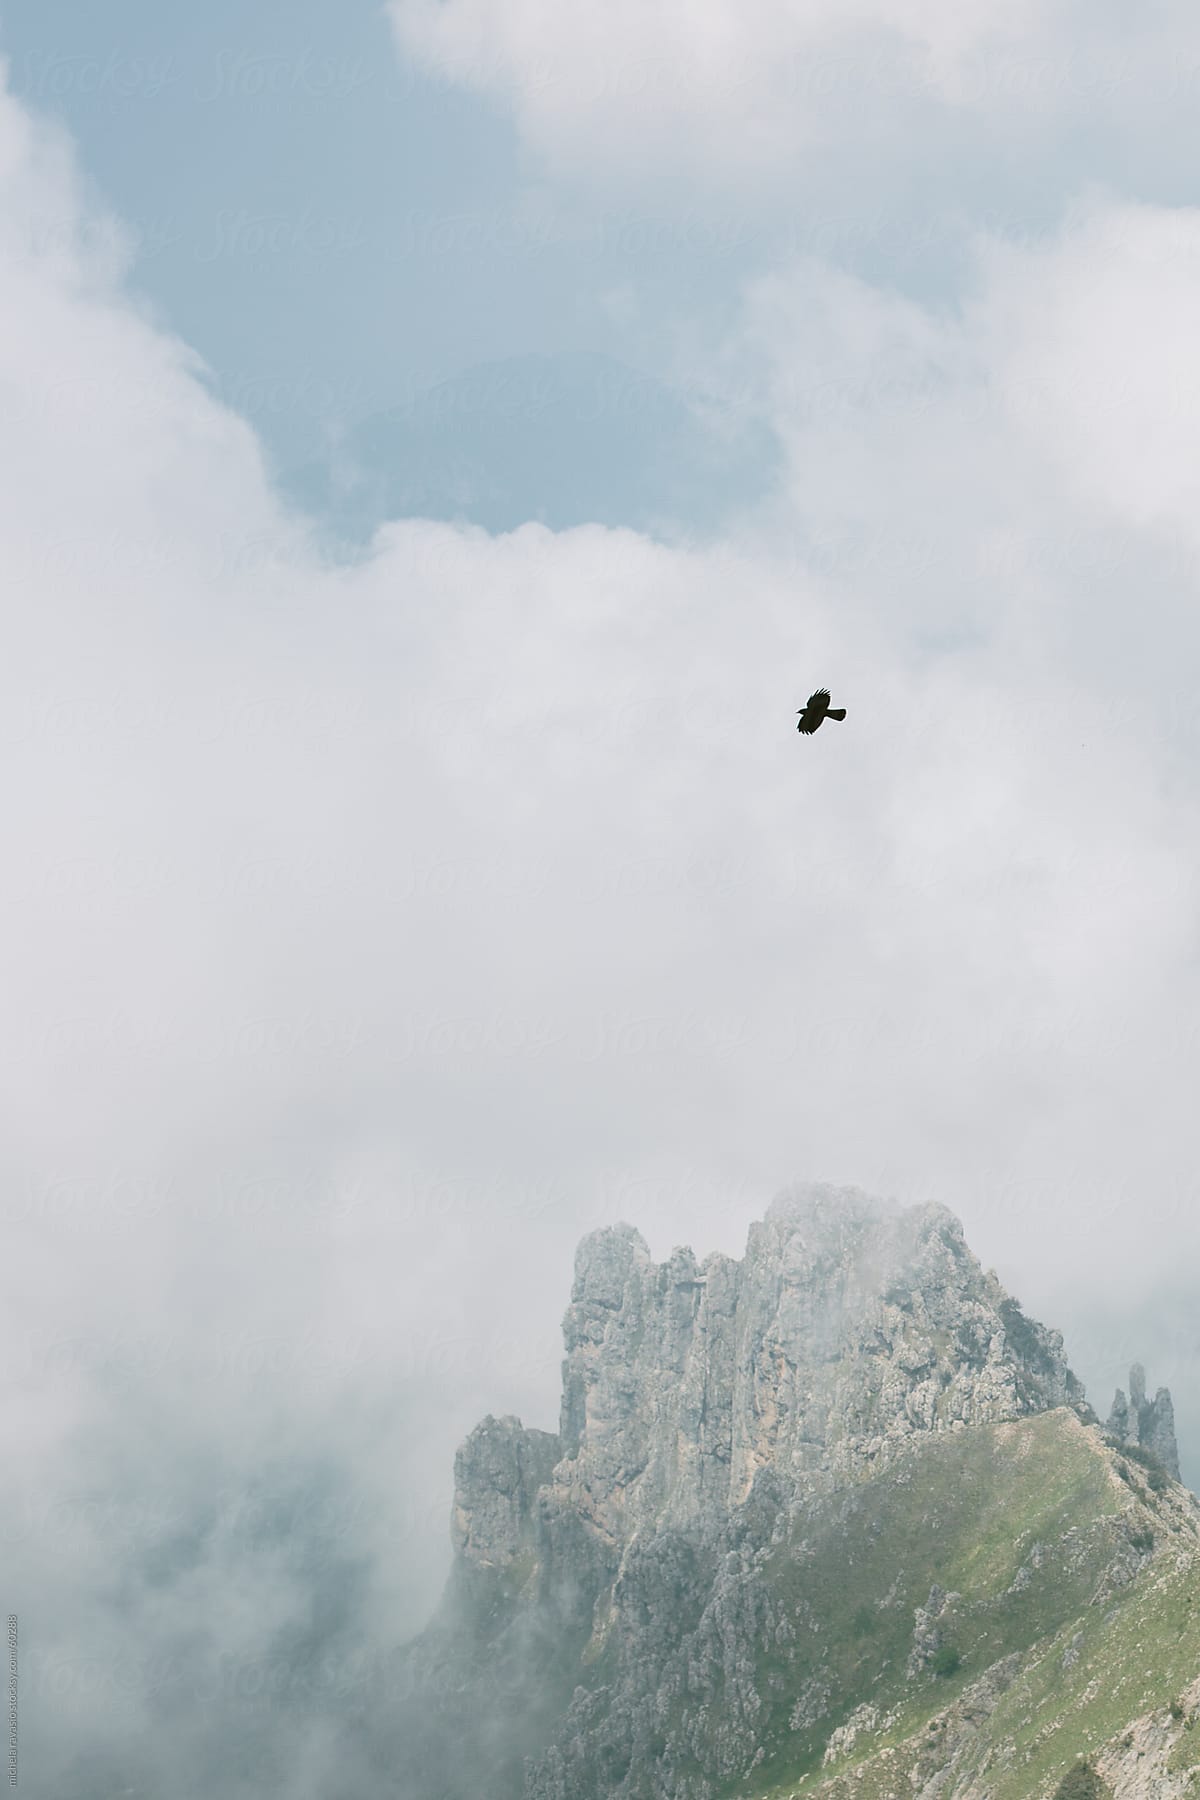 A bird flying on top of the mountain